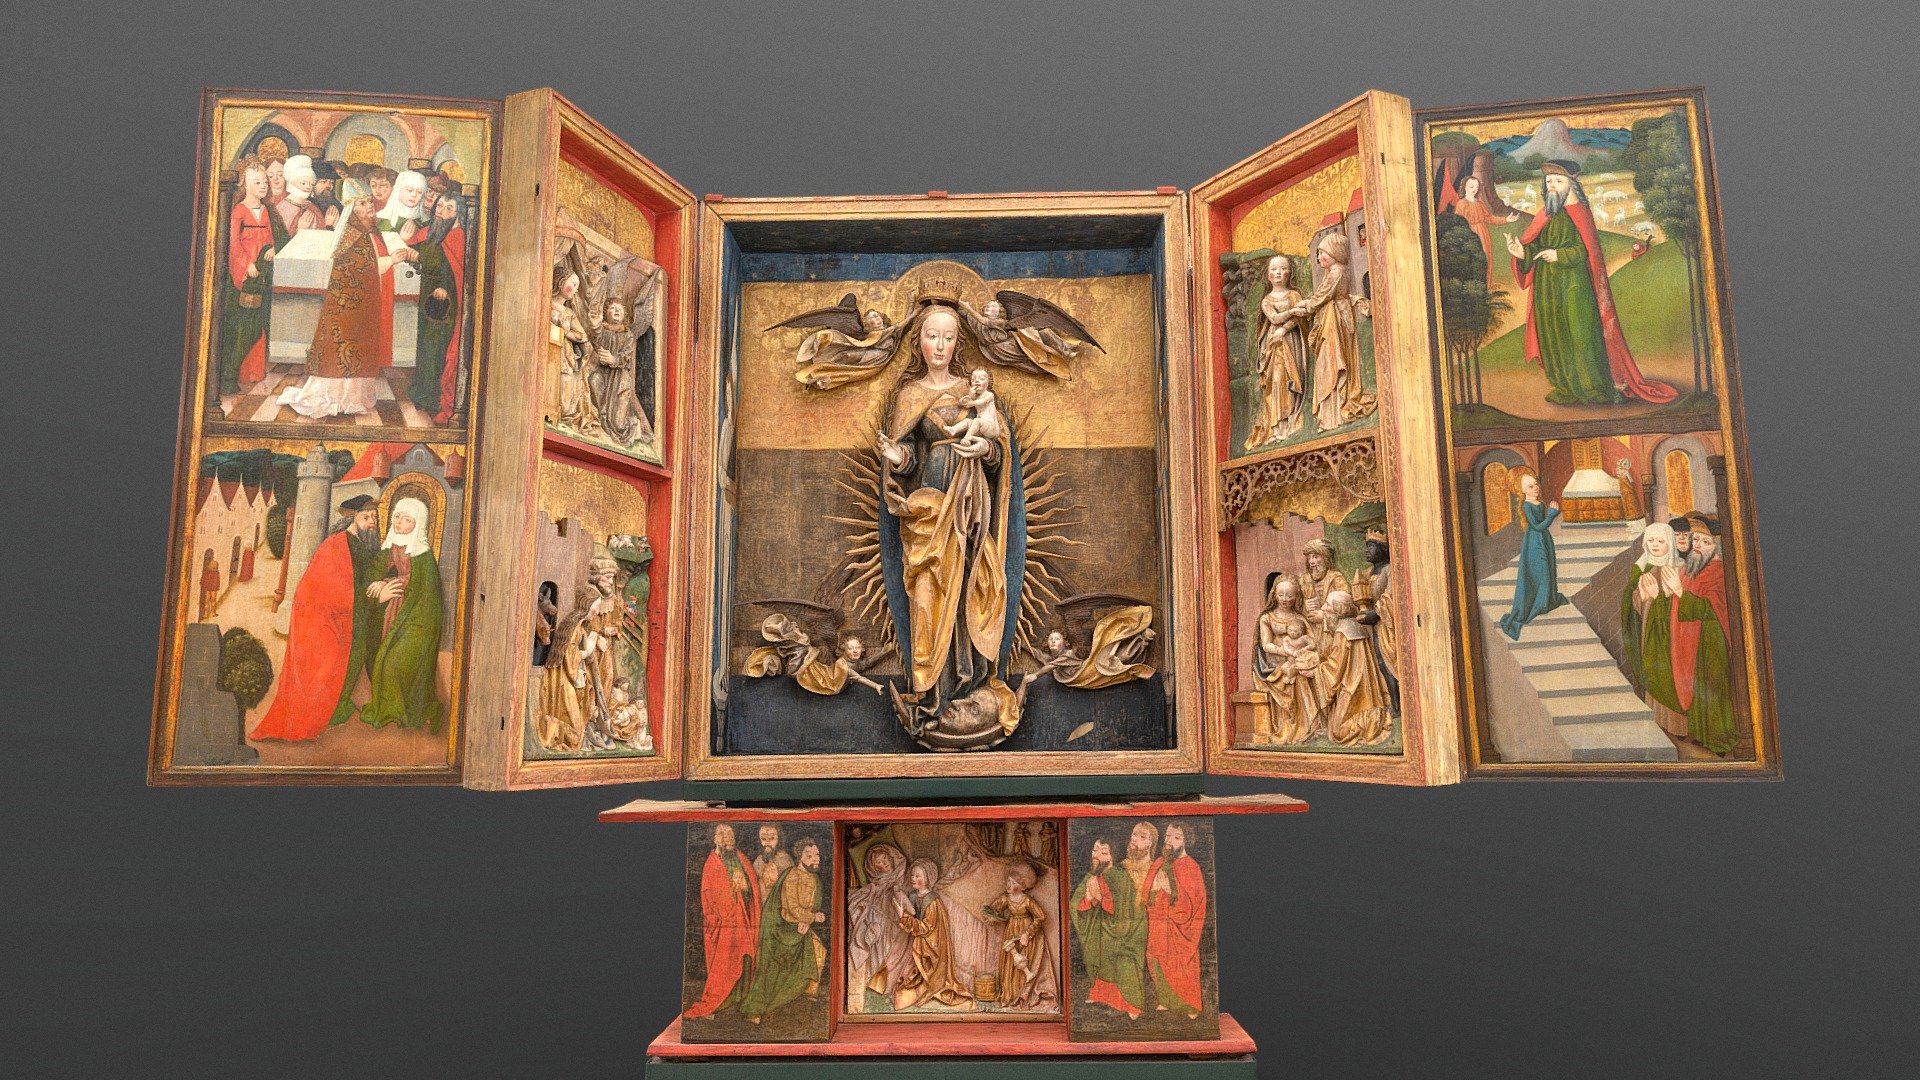 Teplice - Furstenau church Madonna altar with added altar wings paintings (Litomerice)

project for Euroregion Elbe-Labe heritage program

photogrammetry scan (900x36MP) - Teplice - Furstenau church altar - 3D model by matousekfoto 3d model